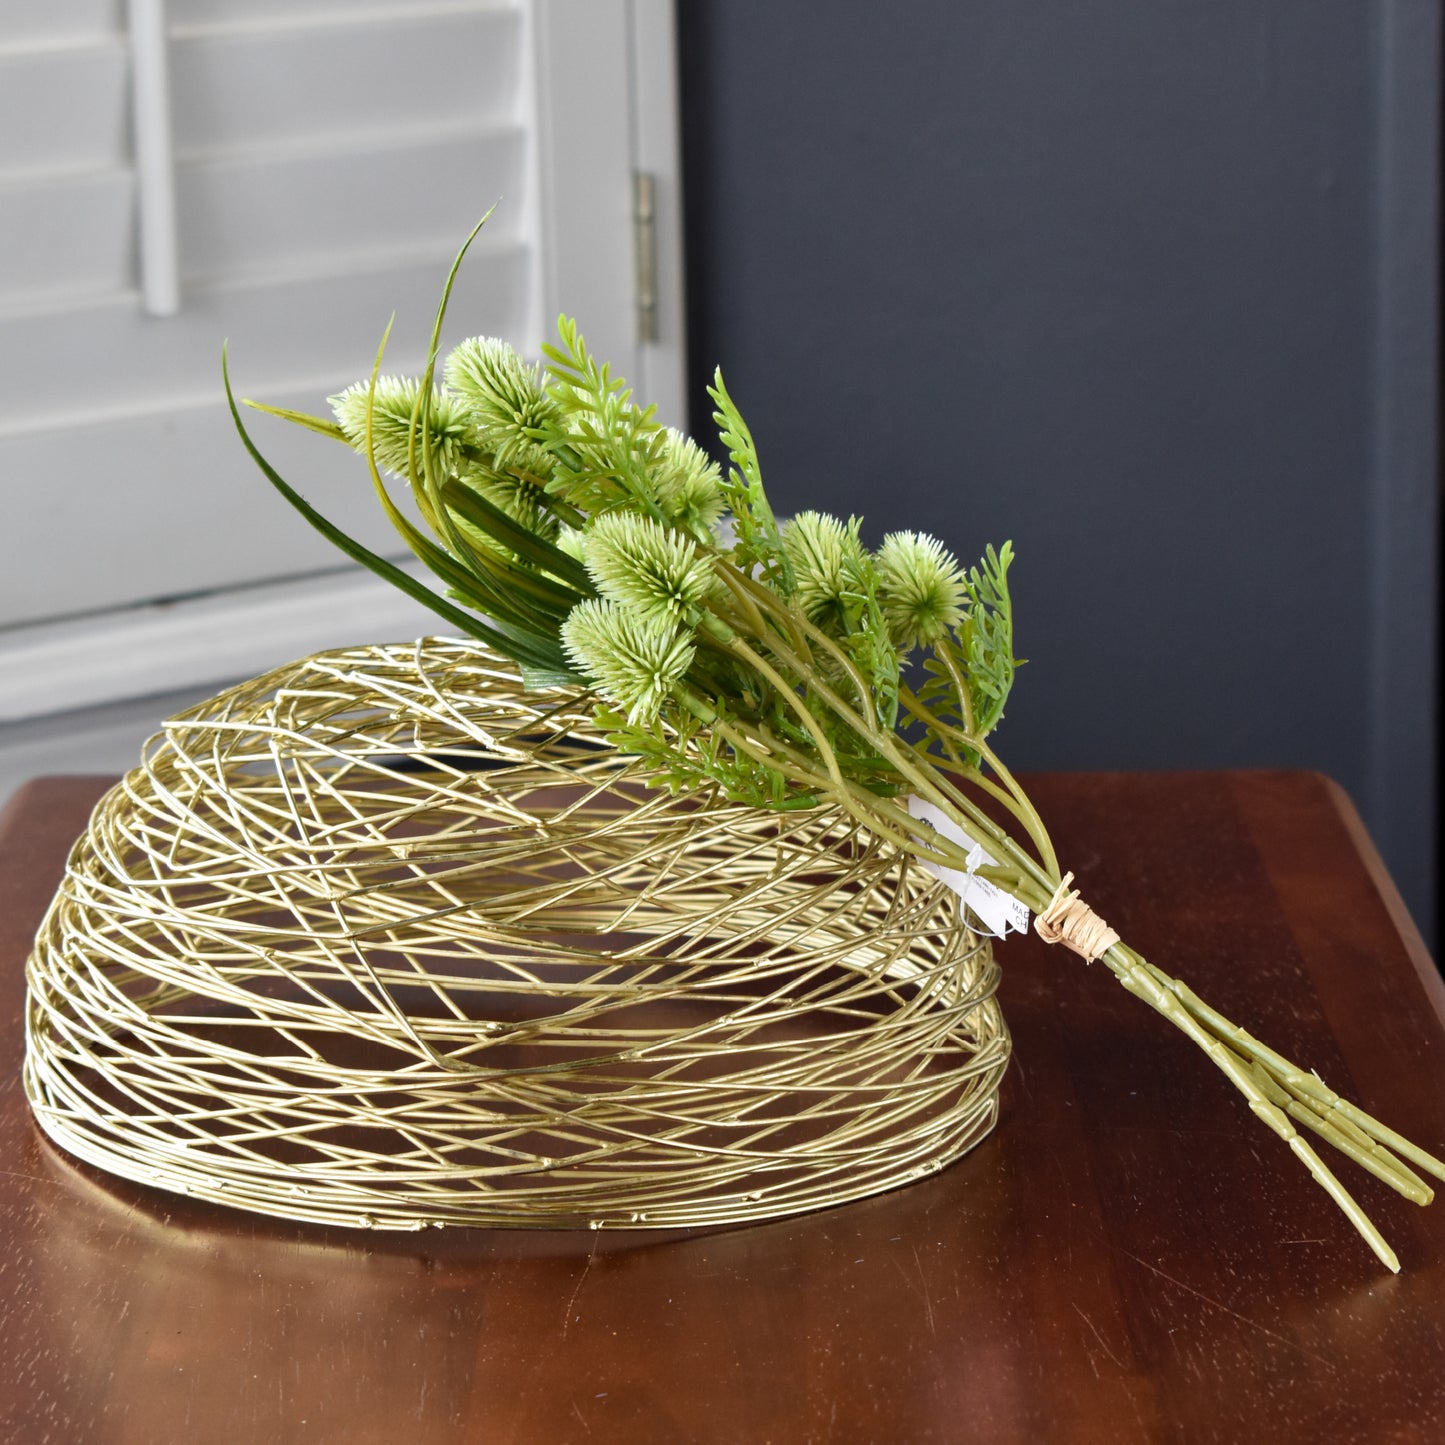 Bunny Tails Ball Leaves Bundle - 5 Colors